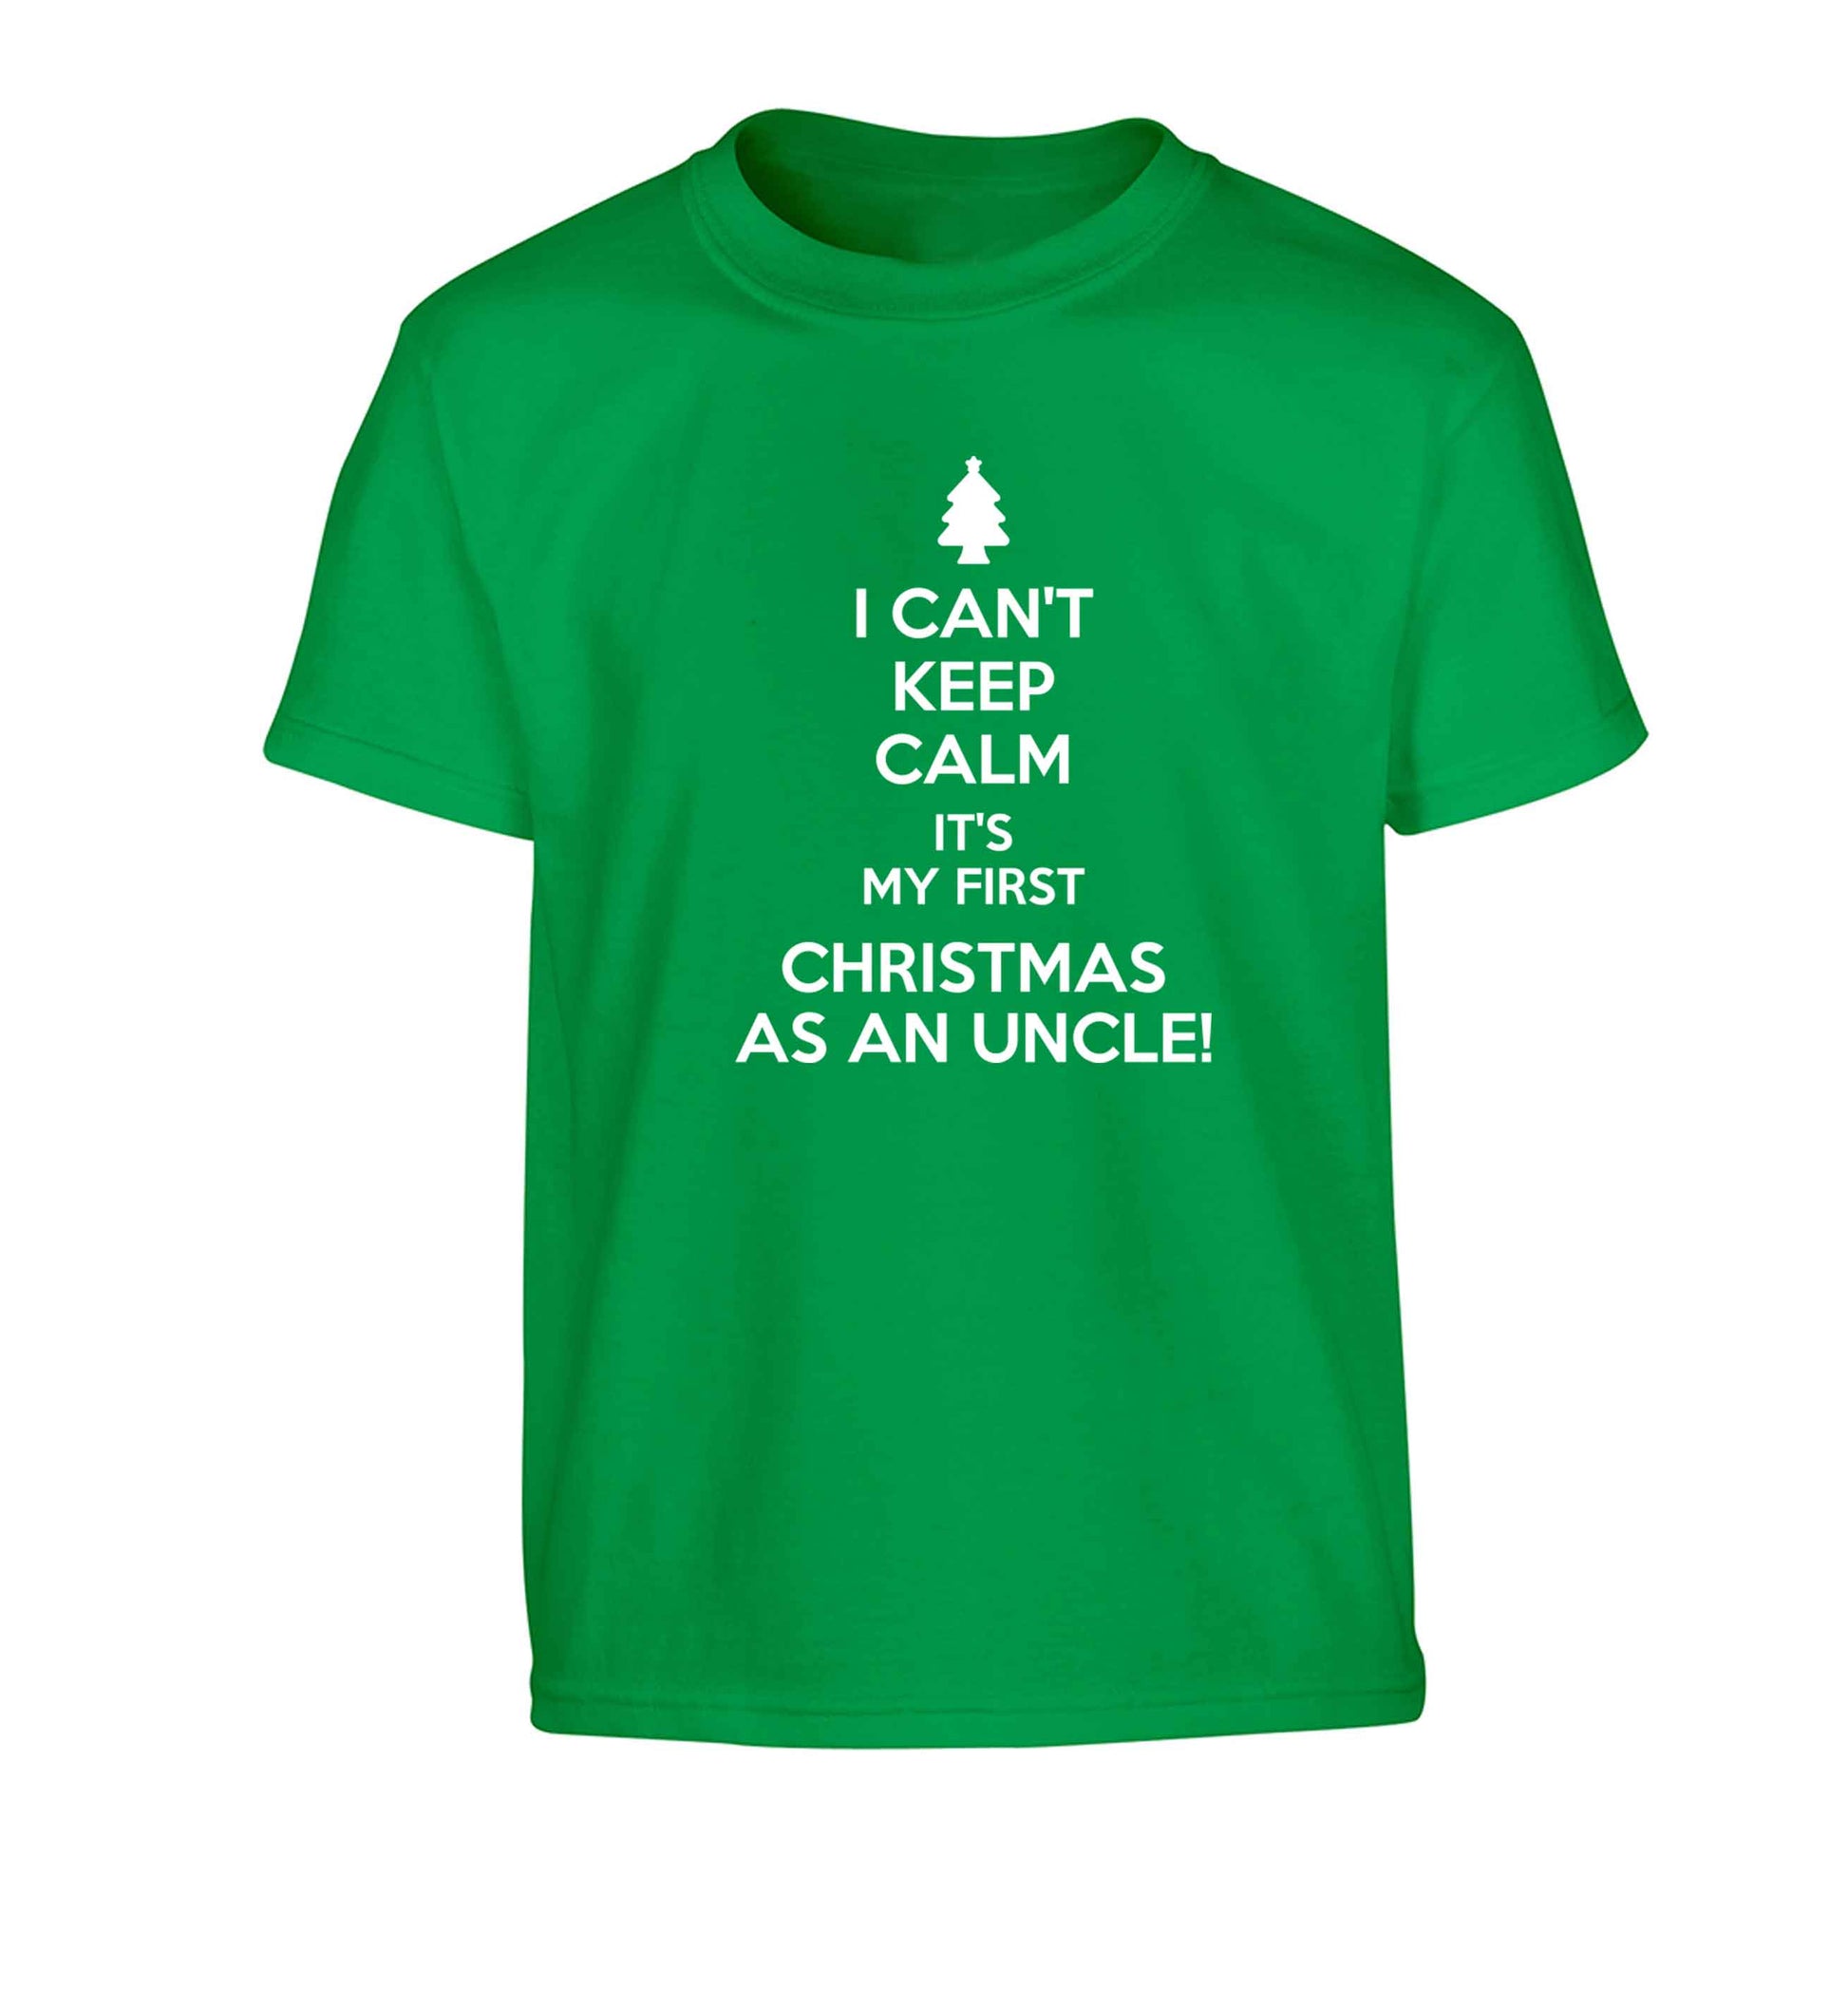 I can't keep calm it's my first Christmas as an uncle! Children's green Tshirt 12-13 Years